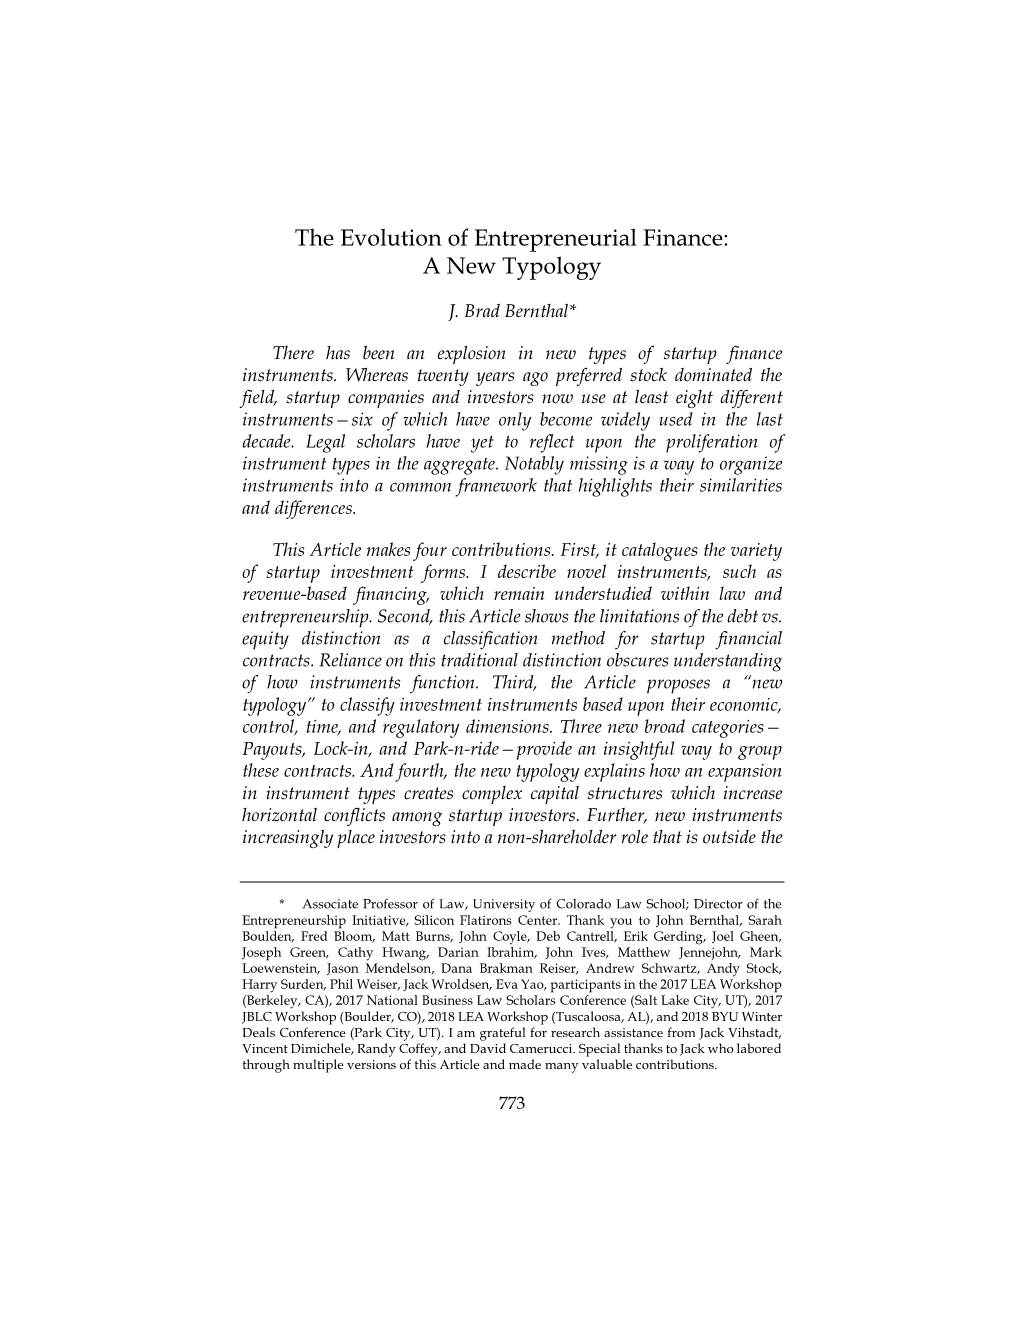 The Evolution of Entrepreneurial Finance: a New Typology